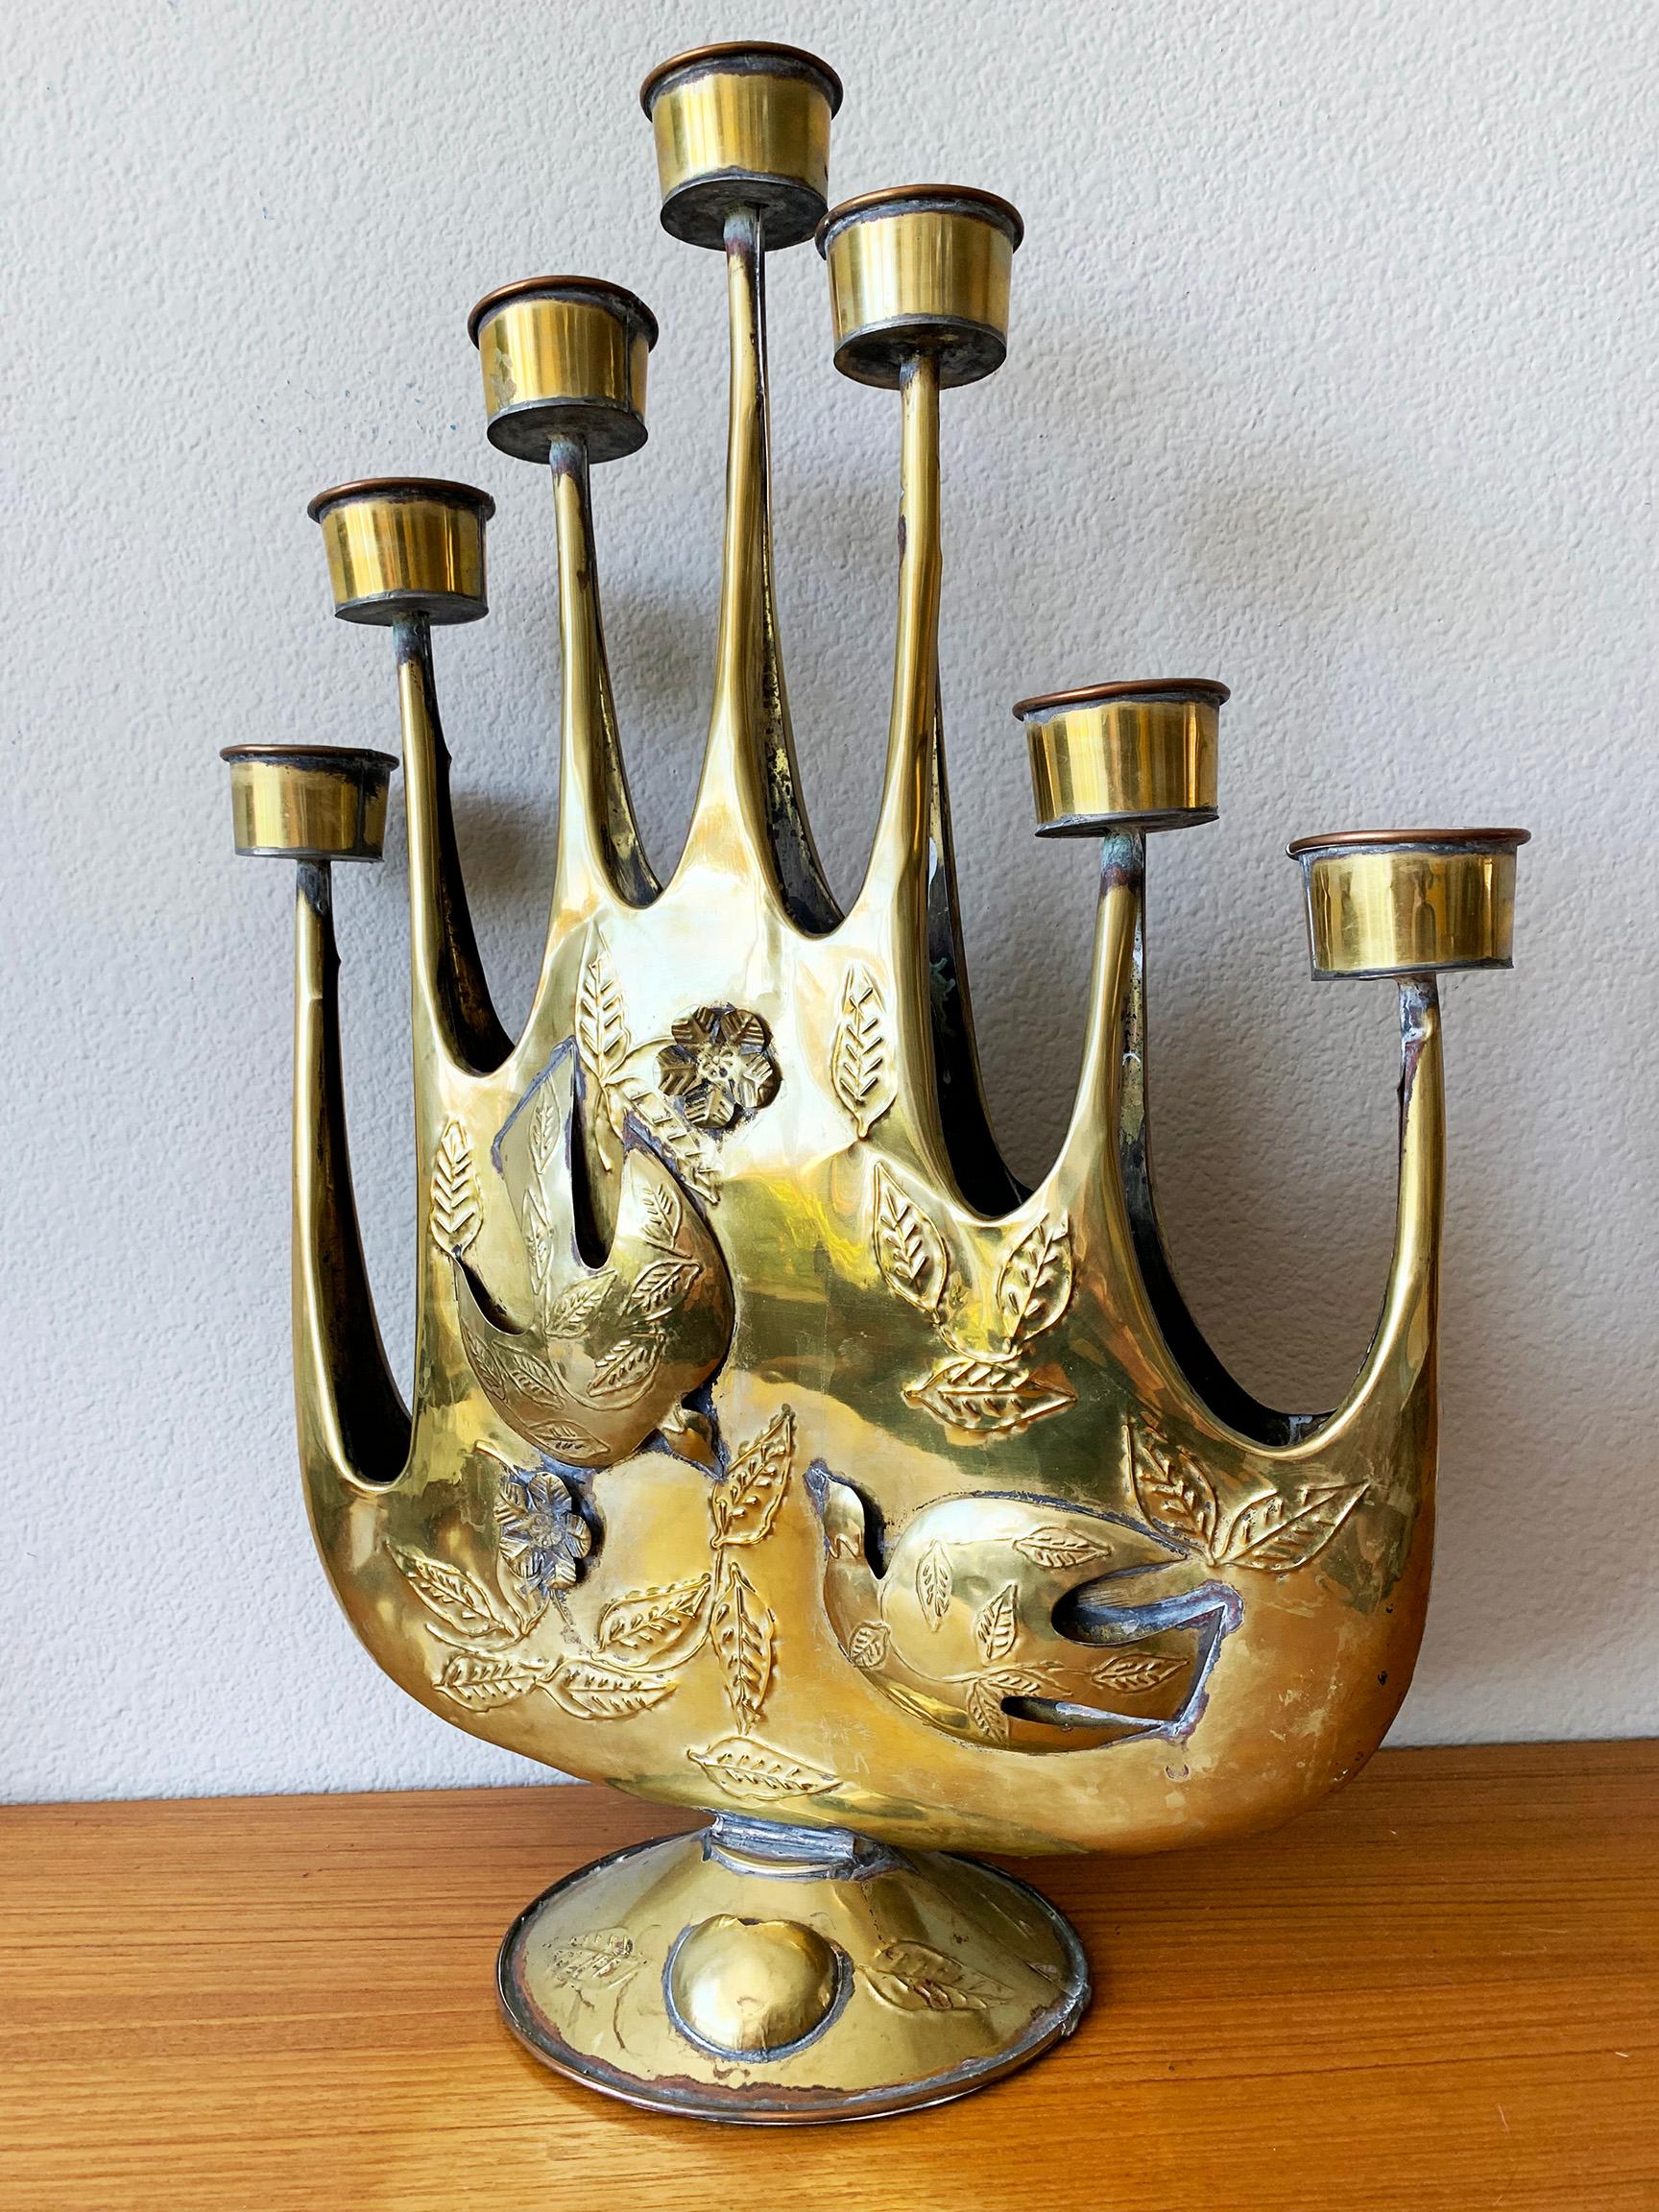 An increasingly rare and beautiful brass plated Brutalist tin candelabra by Mexican artist Gene Byron. handmade, hammered tin with lovely detail. This beautiful piece was also featured in the Verna Cook Shipway Mexican modernism design books of the